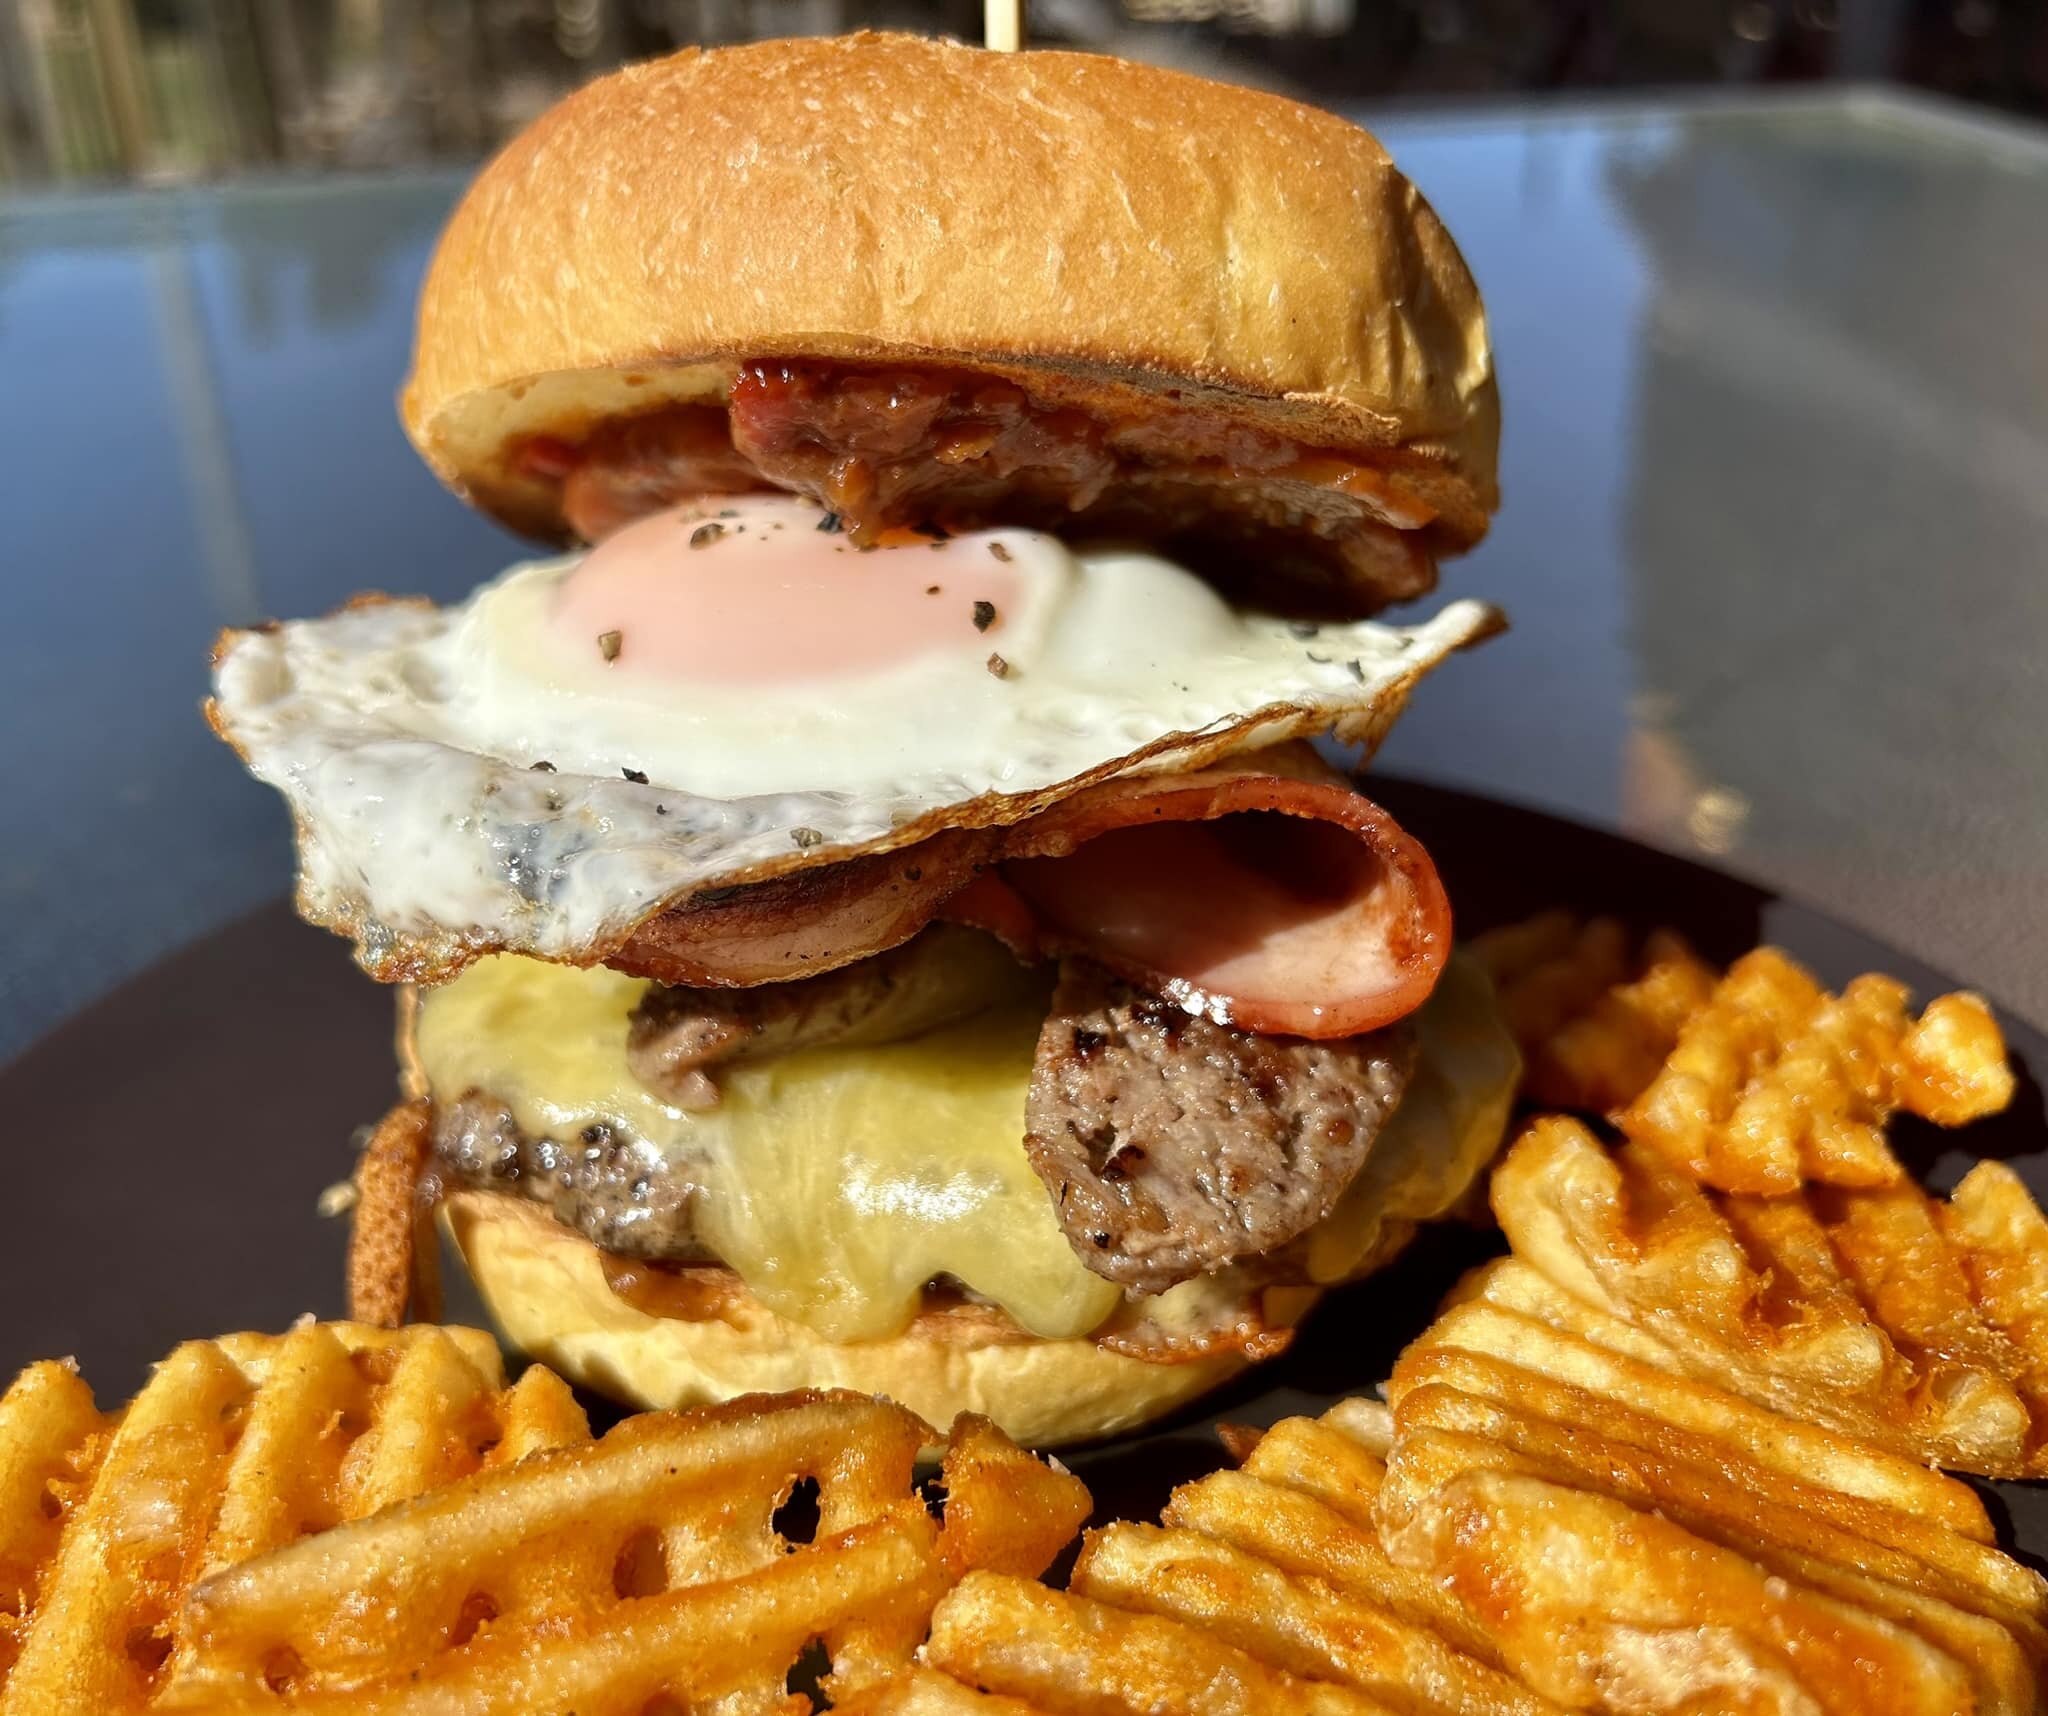 IT&rsquo;S BOD DROP DAY🍔👍
Beef patty, Swiss cheese, sausage, grilled bacon, fried egg, house made tomato relish served with waffle chips
Mmmmmmmm
Burger Baby Margaret River  Doust's Corner